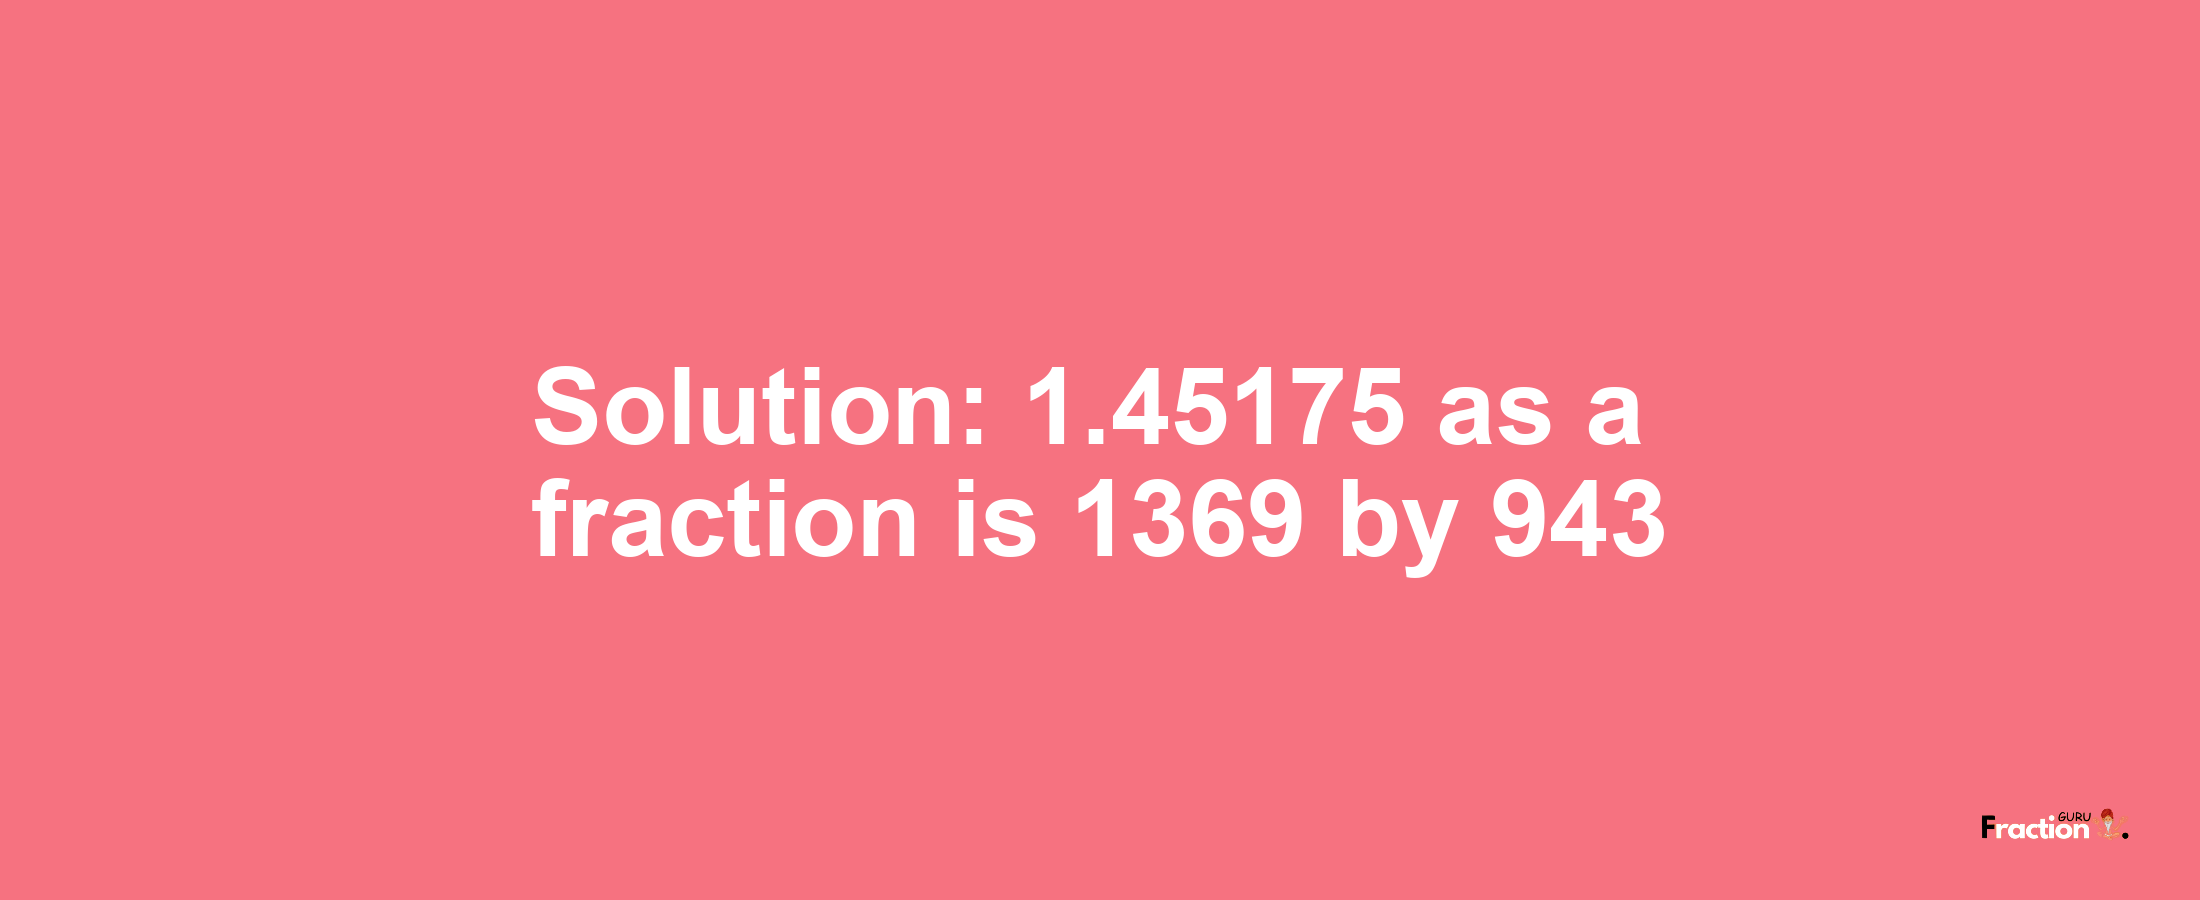 Solution:1.45175 as a fraction is 1369/943